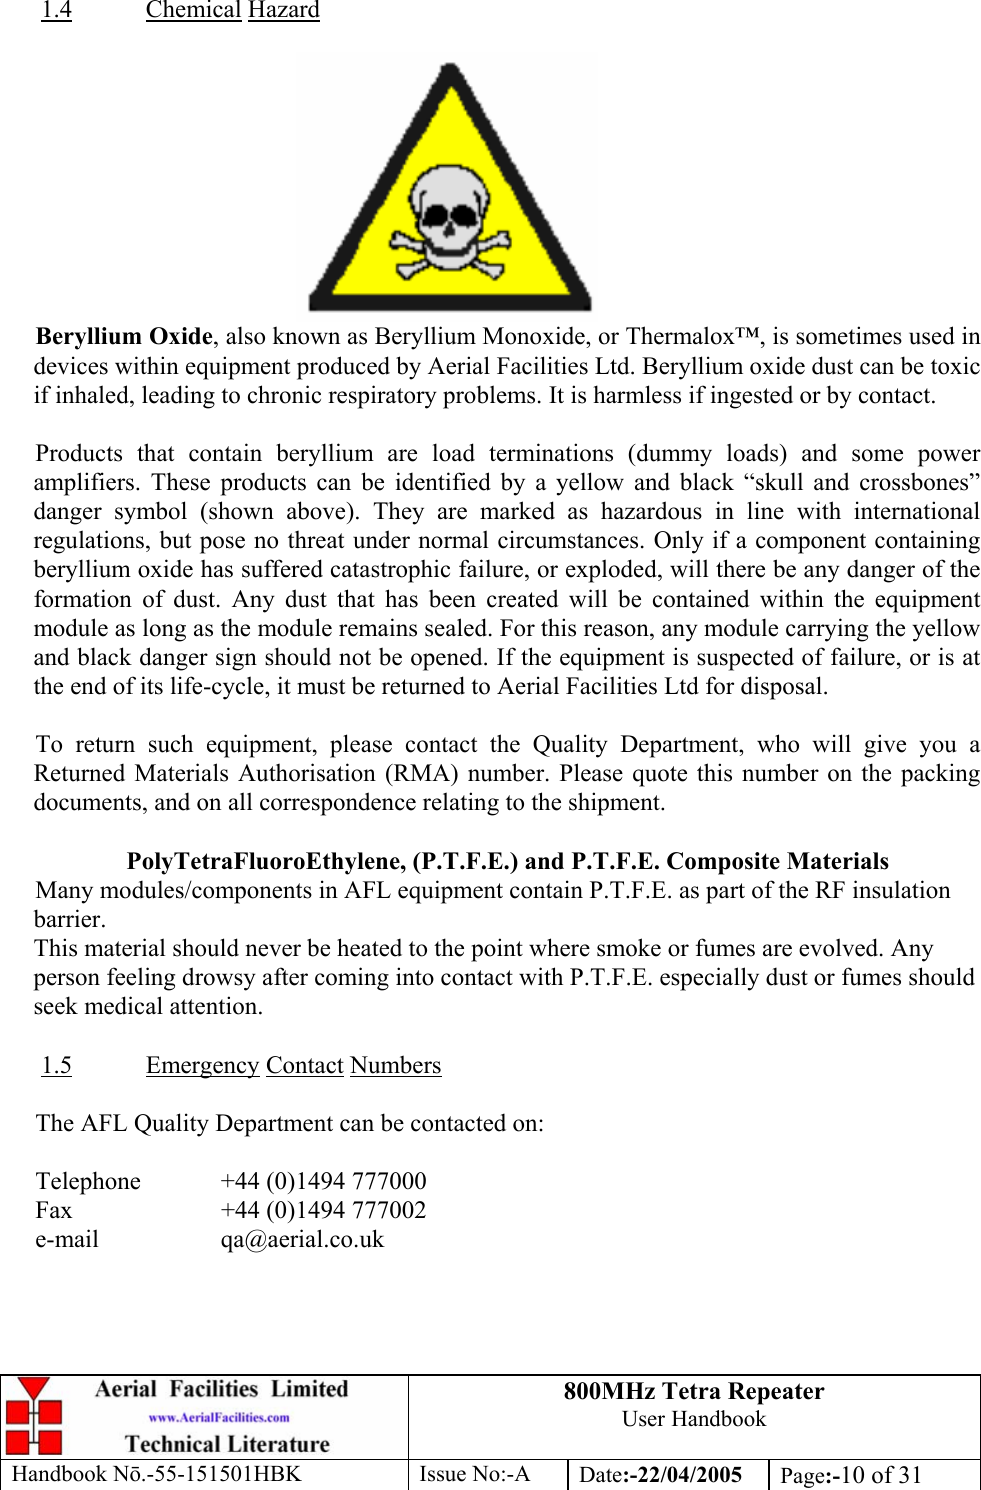 800MHz Tetra Repeater User Handbook Handbook Nō.-55-151501HBK Issue No:-A Date:-22/04/2005  Page:-10 of 31   1.4 Chemical Hazard   Beryllium Oxide, also known as Beryllium Monoxide, or Thermalox™, is sometimes used in devices within equipment produced by Aerial Facilities Ltd. Beryllium oxide dust can be toxic if inhaled, leading to chronic respiratory problems. It is harmless if ingested or by contact.  Products that contain beryllium are load terminations (dummy loads) and some power amplifiers. These products can be identified by a yellow and black “skull and crossbones” danger symbol (shown above). They are marked as hazardous in line with international regulations, but pose no threat under normal circumstances. Only if a component containing beryllium oxide has suffered catastrophic failure, or exploded, will there be any danger of the formation of dust. Any dust that has been created will be contained within the equipment module as long as the module remains sealed. For this reason, any module carrying the yellow and black danger sign should not be opened. If the equipment is suspected of failure, or is at the end of its life-cycle, it must be returned to Aerial Facilities Ltd for disposal.  To return such equipment, please contact the Quality Department, who will give you a Returned Materials Authorisation (RMA) number. Please quote this number on the packing documents, and on all correspondence relating to the shipment.  PolyTetraFluoroEthylene, (P.T.F.E.) and P.T.F.E. Composite Materials Many modules/components in AFL equipment contain P.T.F.E. as part of the RF insulation barrier. This material should never be heated to the point where smoke or fumes are evolved. Any person feeling drowsy after coming into contact with P.T.F.E. especially dust or fumes should seek medical attention.  1.5 Emergency Contact Numbers  The AFL Quality Department can be contacted on:  Telephone   +44 (0)1494 777000 Fax    +44 (0)1494 777002 e-mail   qa@aerial.co.uk  